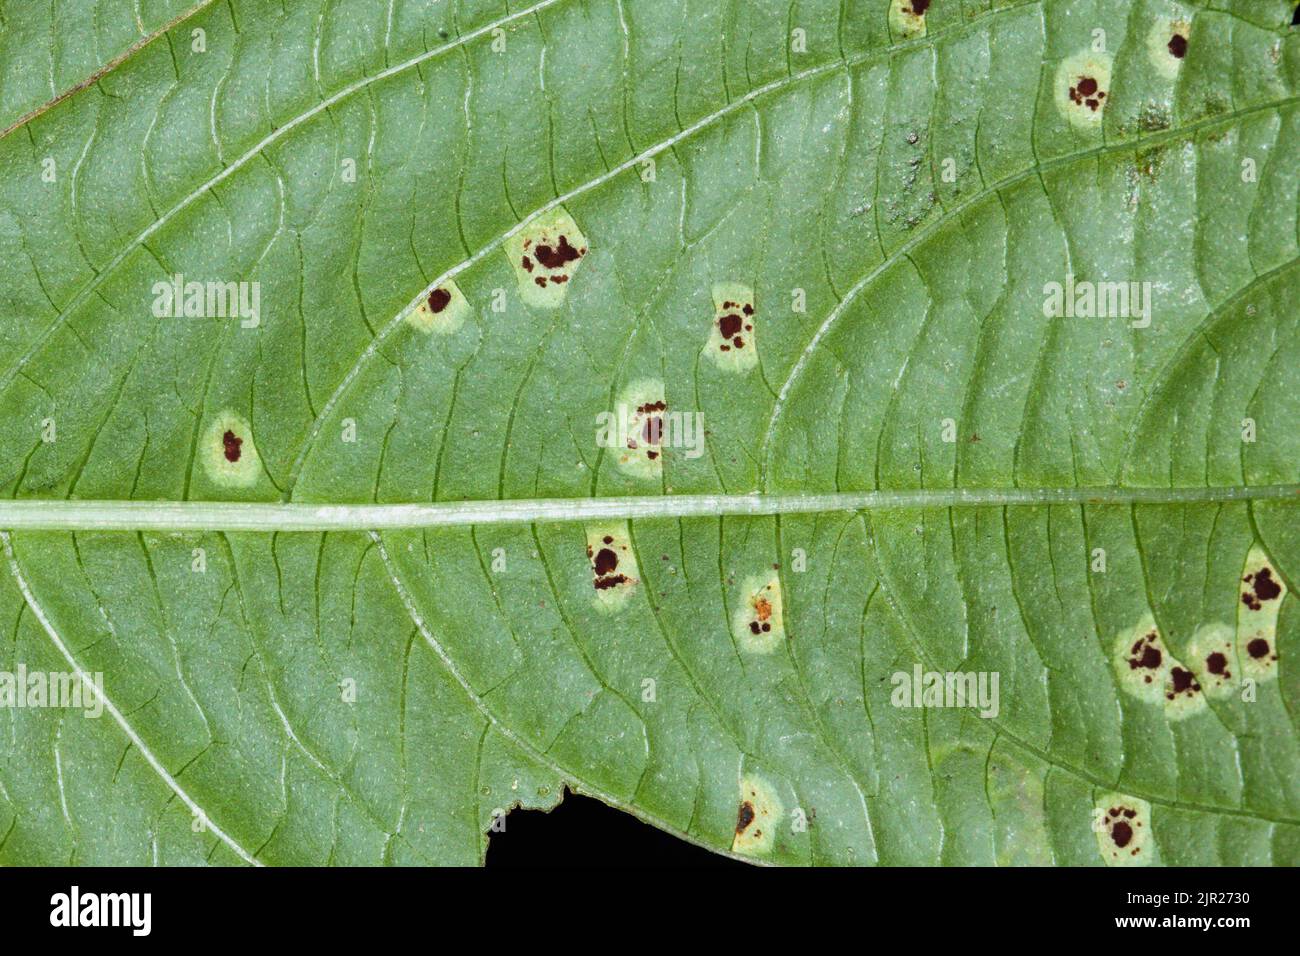 Rust caused by Puccinia komarovii on green leaf of Impatiens parviflora (Small balsam) Stock Photo